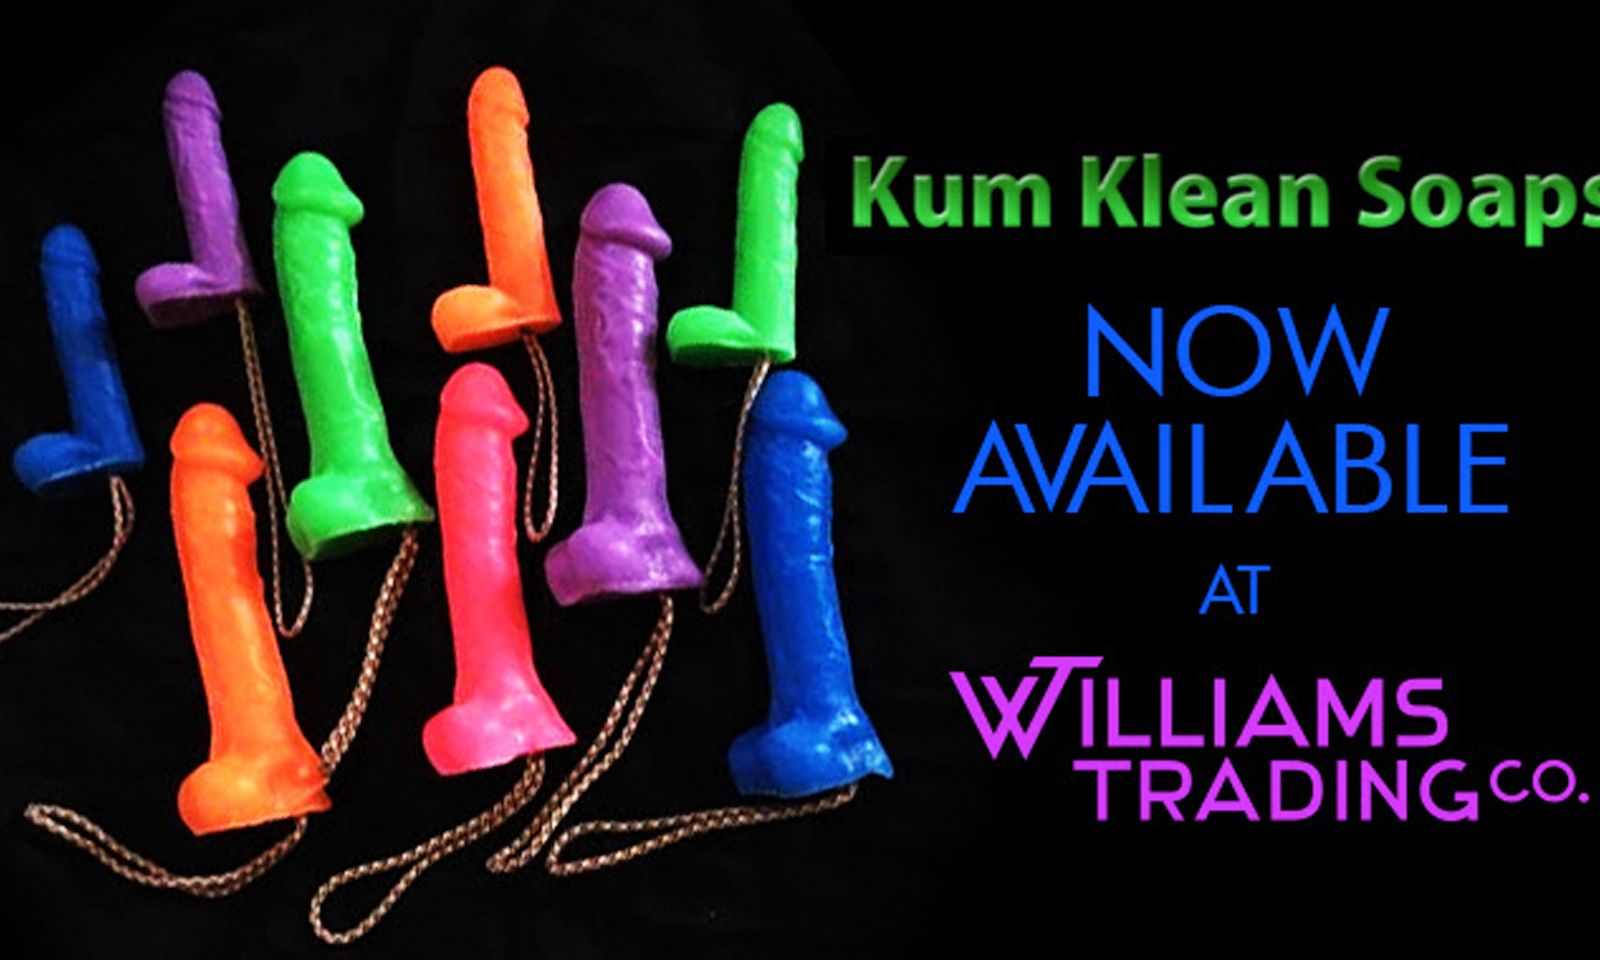 Williams Trading Has Kum Klean Soaps Available